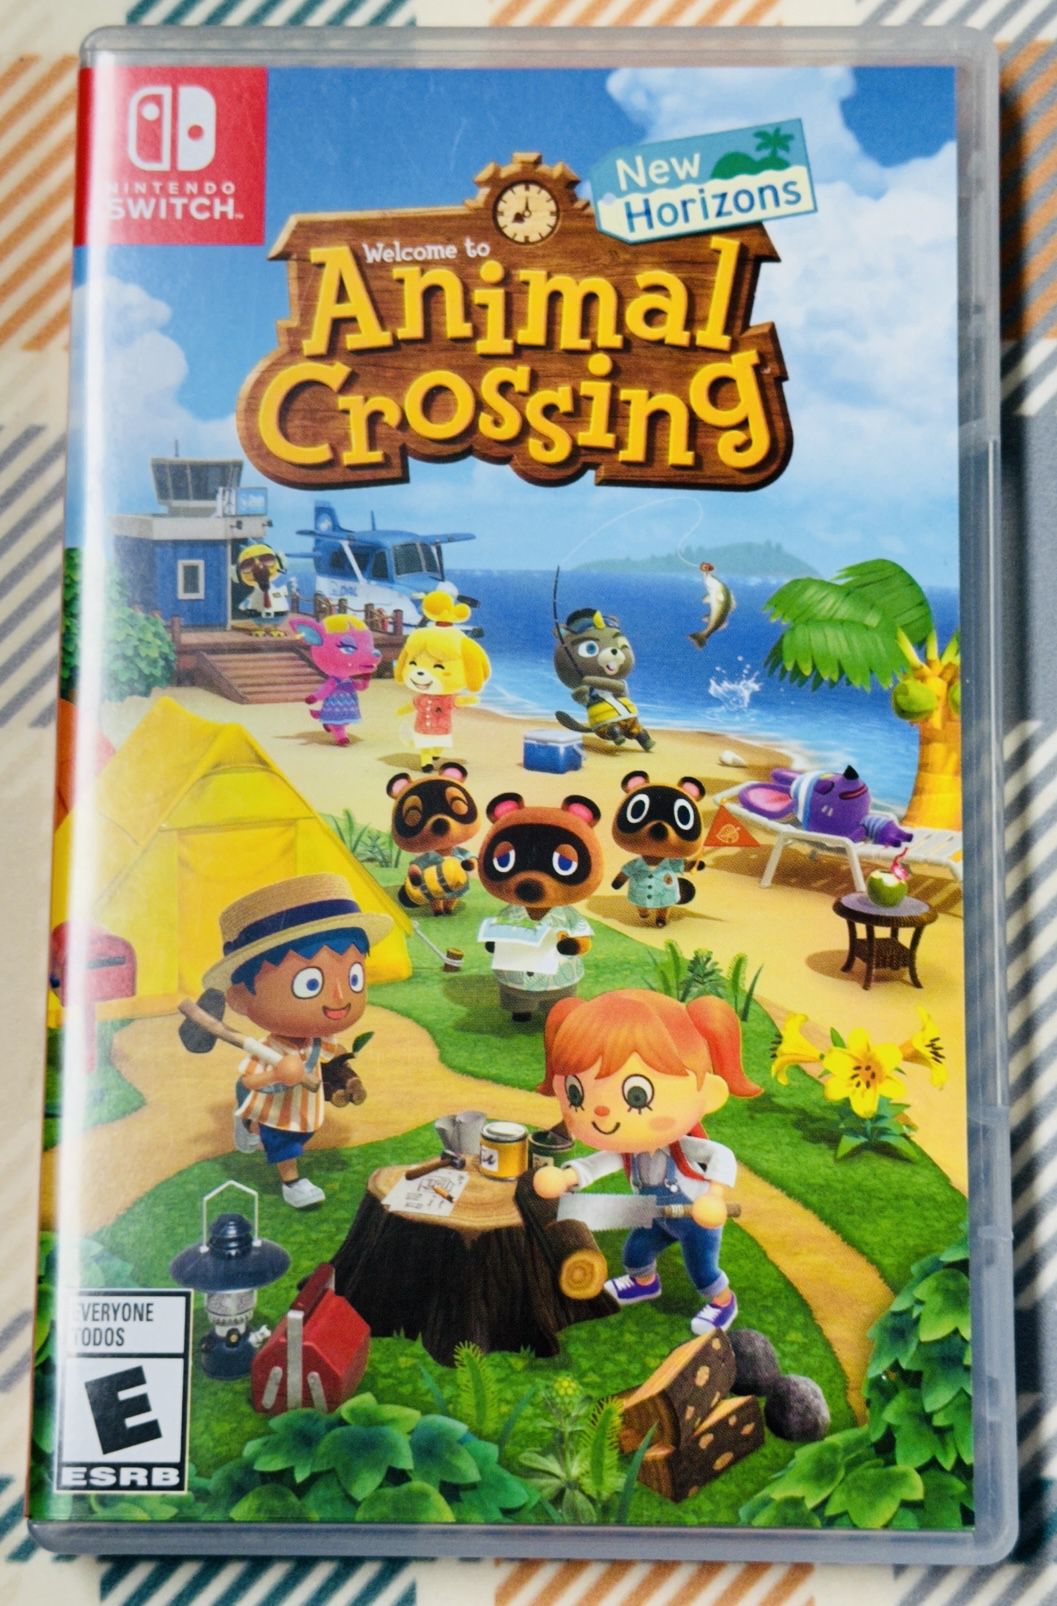 Animal Crossing: New Horizons - Nintendo Switch 2020 Tested Fast Shipping